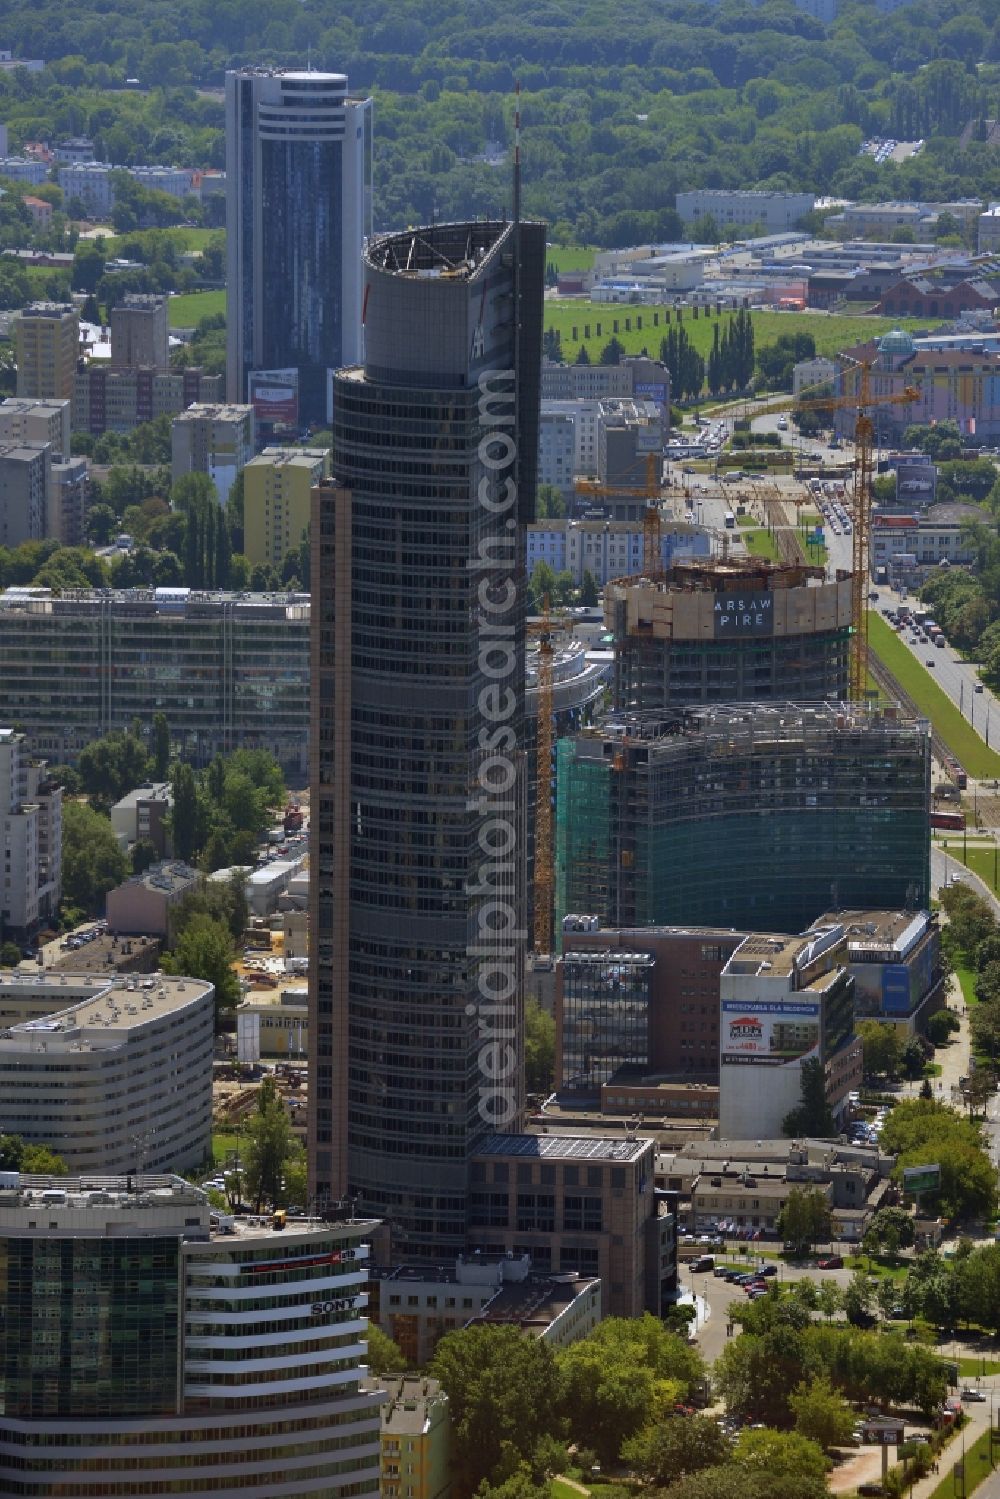 Aerial photograph Warschau - Warsaw Trade Tower in the Wola district of Warsaw in Poland. The skyscraper is an office building whose primary tenant is the insurance company AXA. Its logo is very well visible on the upper floors. The tower is over 200m high and has Europe's fastest elevator. It was completed in 1999 after two years of construction and is the second tallest building in Warsaw